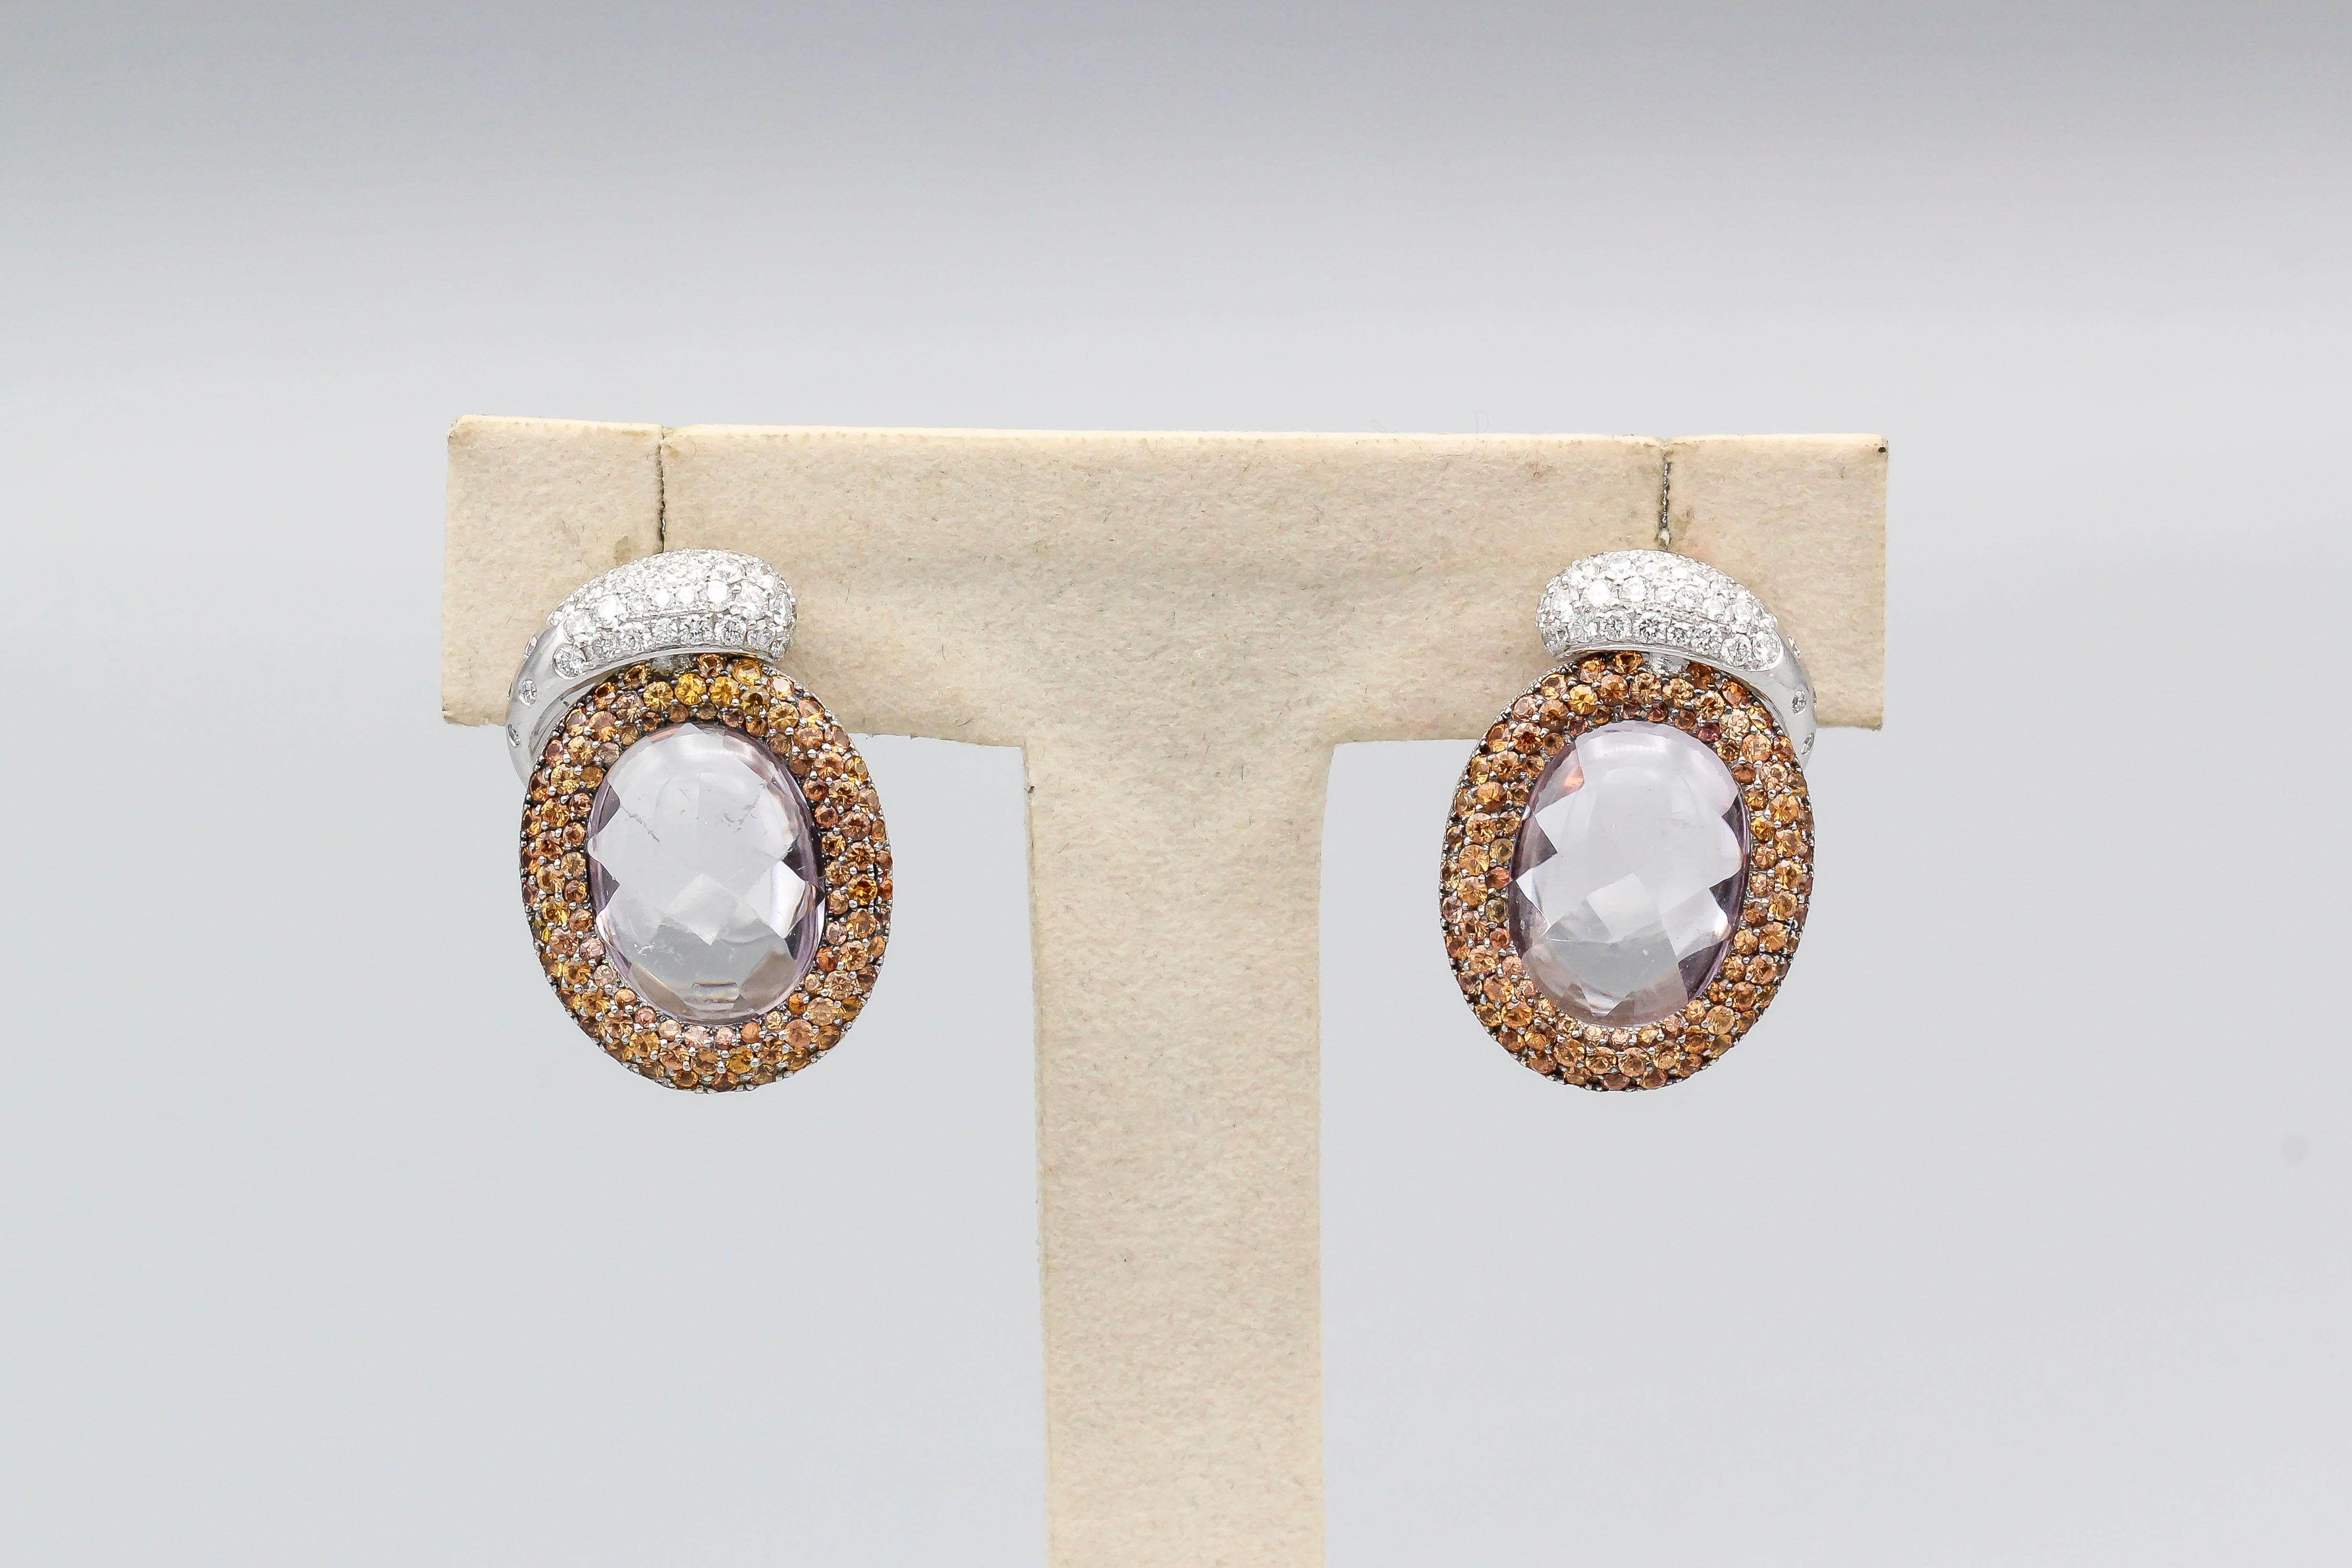 Fine pair of 18K white gold reversible earrings by de Grisogono. The earrings are set with a central kunzite stone that is faceted on one side and cabochon smooth on the other.  They featured a mechanism where the earrings can be worn to show an all